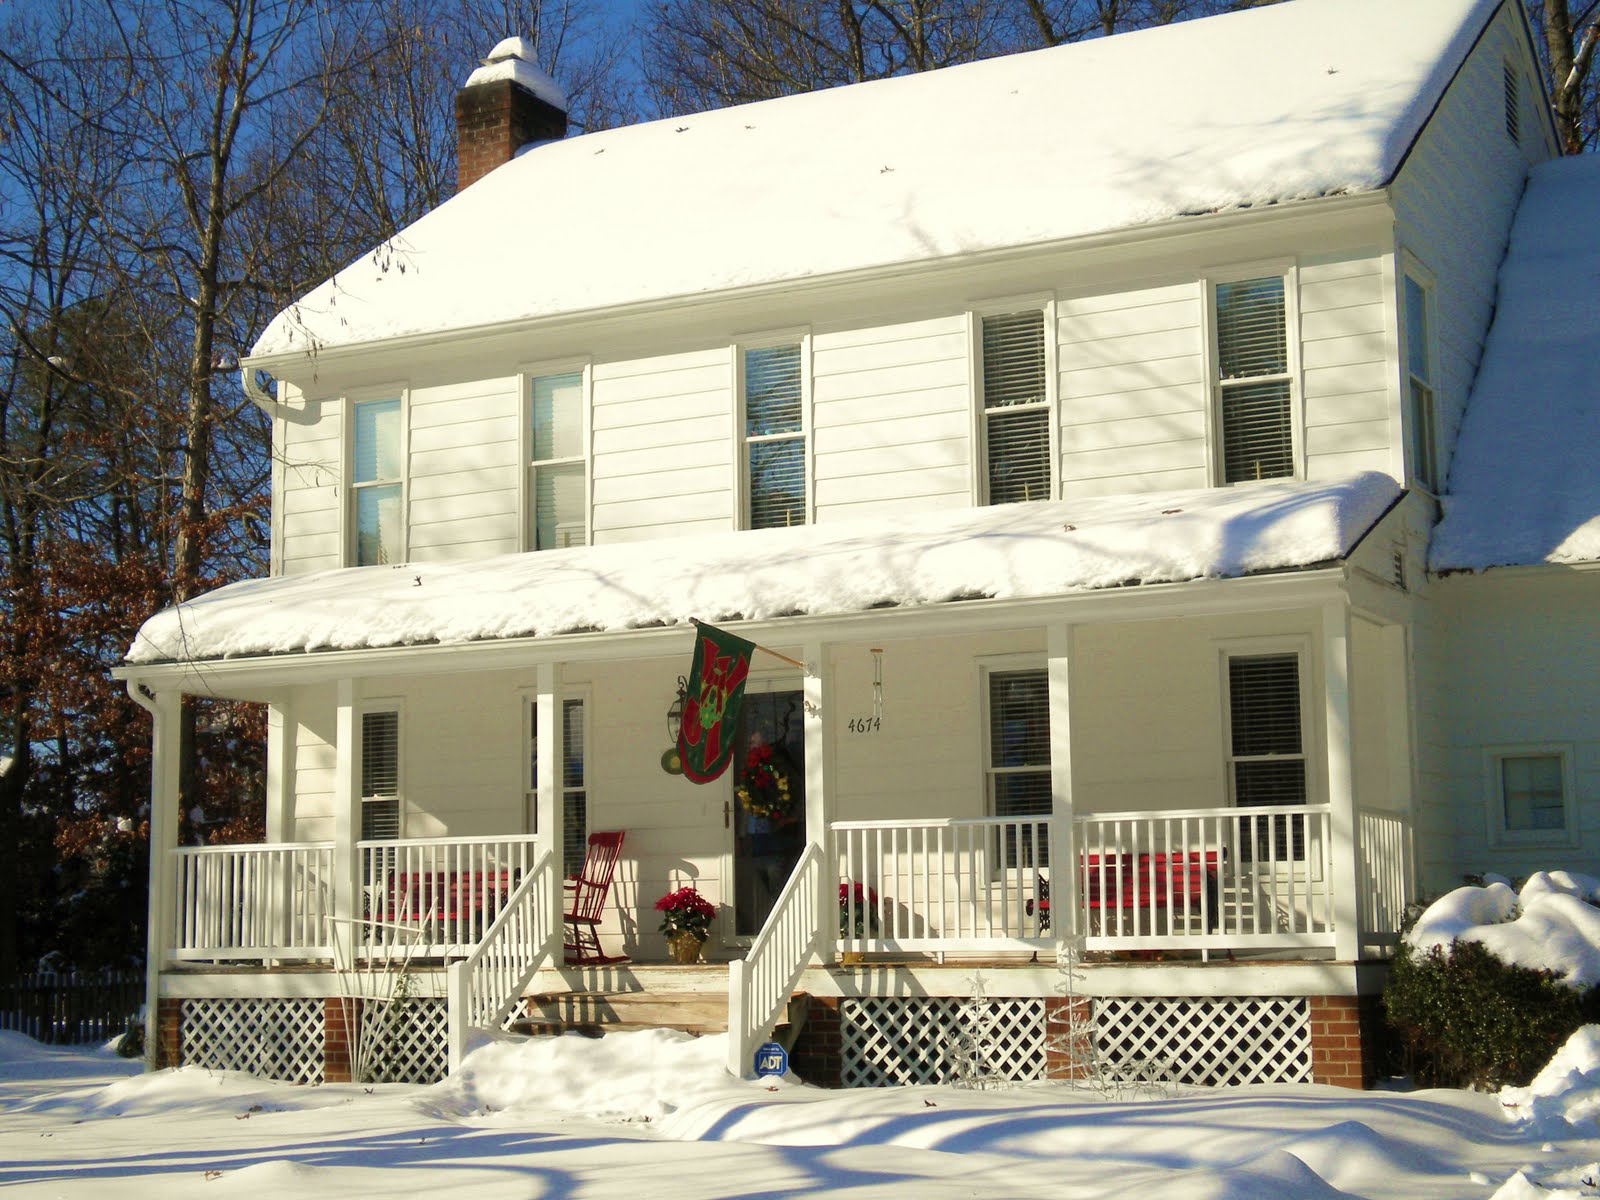 [our+house++covered+with+snow+001.JPG]